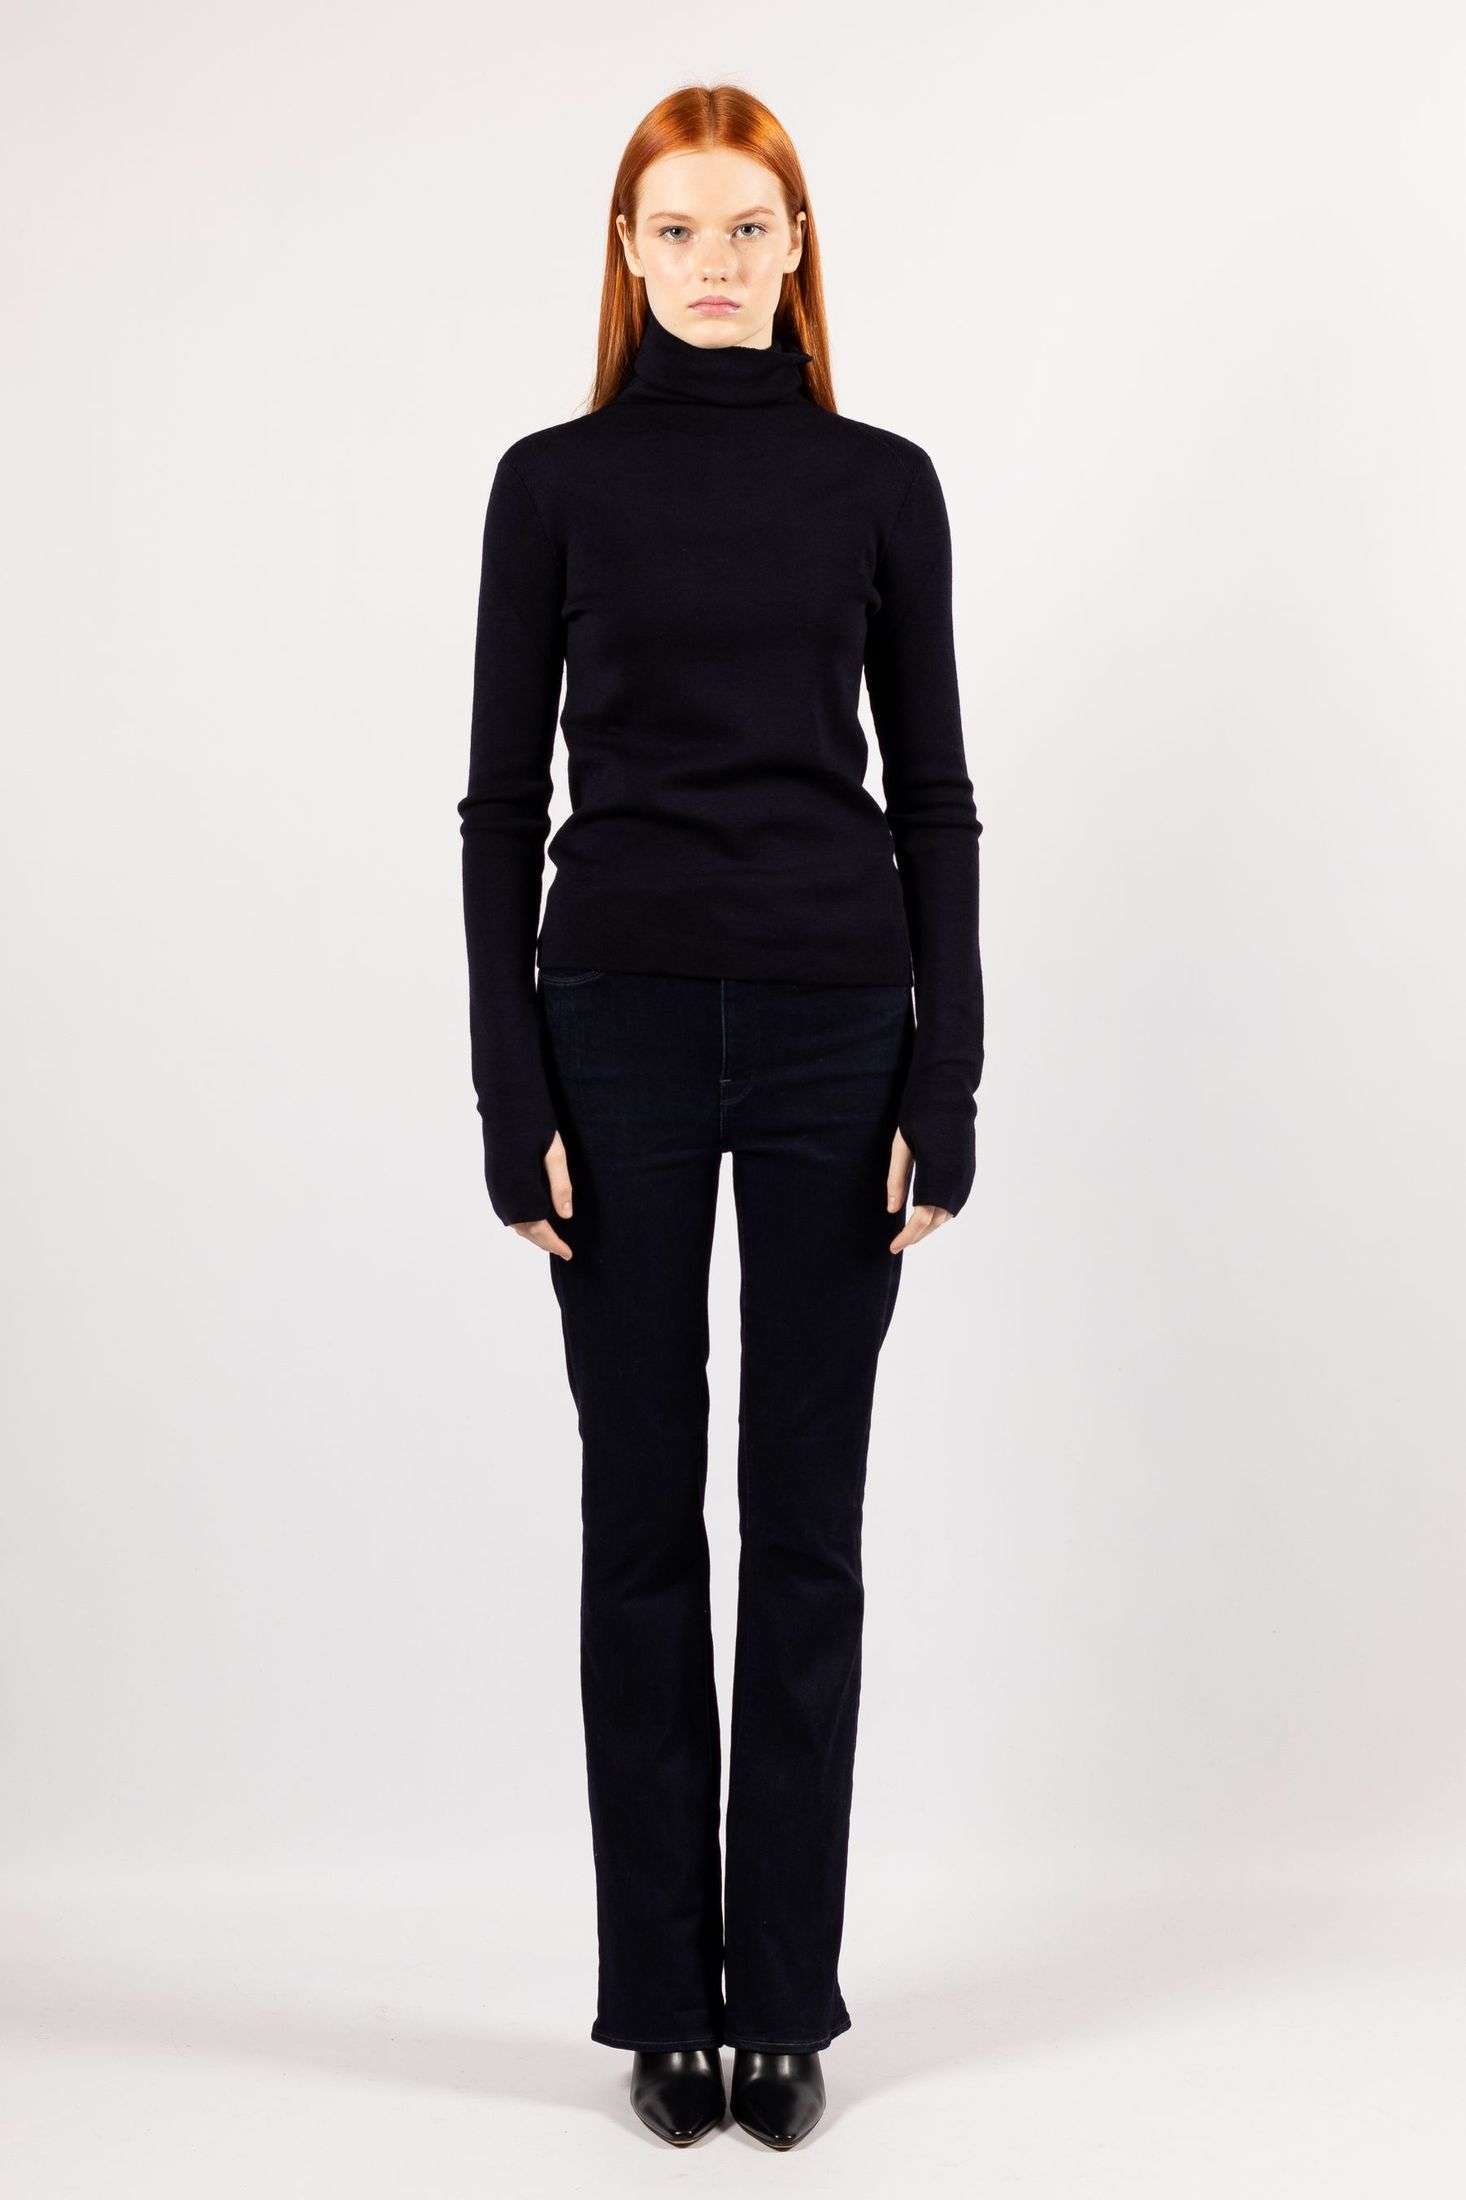 Admire the fashionable choice of a young lady wearing the ADA turtleneck in a captivating navy color.